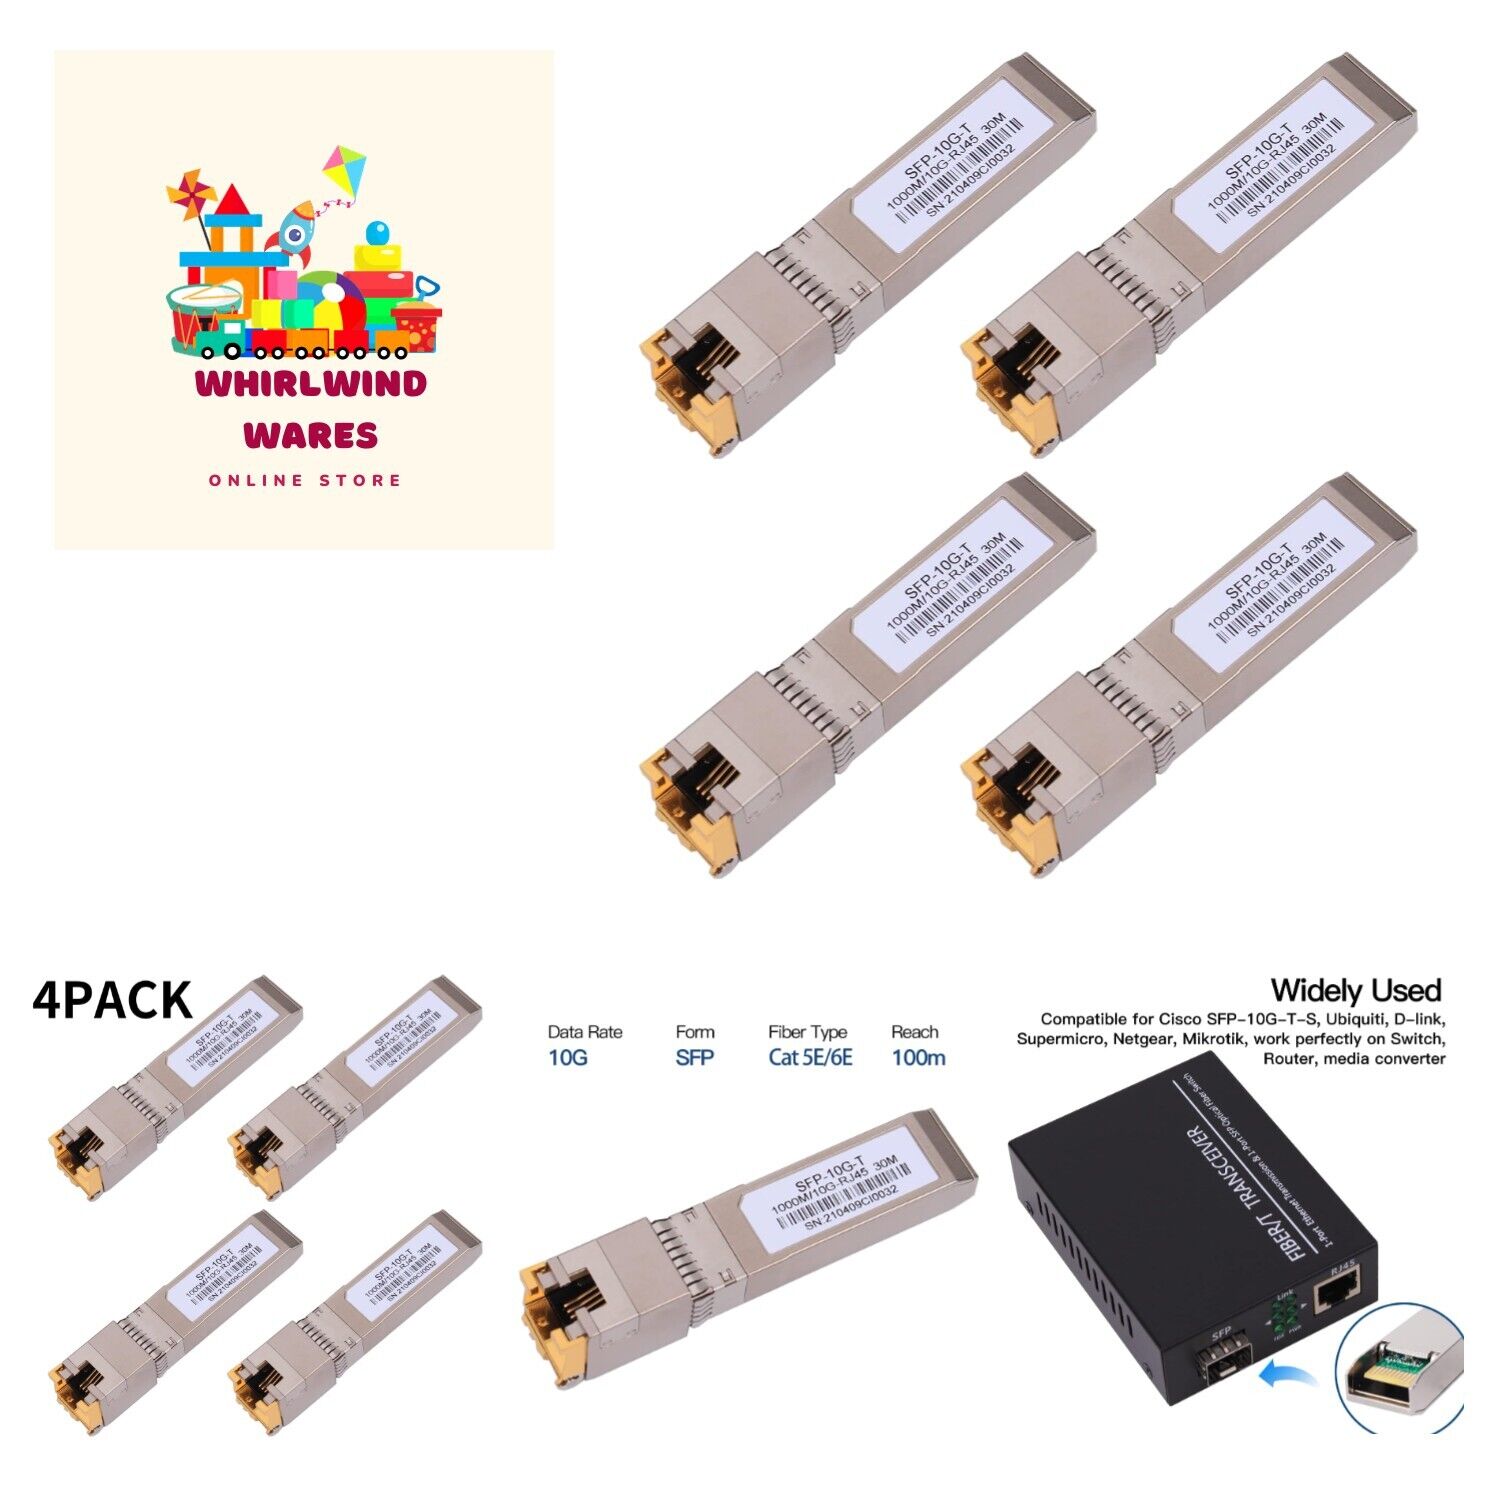 4PACK 10G SFP+ RJ45 Copper Transceiver, 10GBase-T Module SFP CAT.6a/7 up to 3...